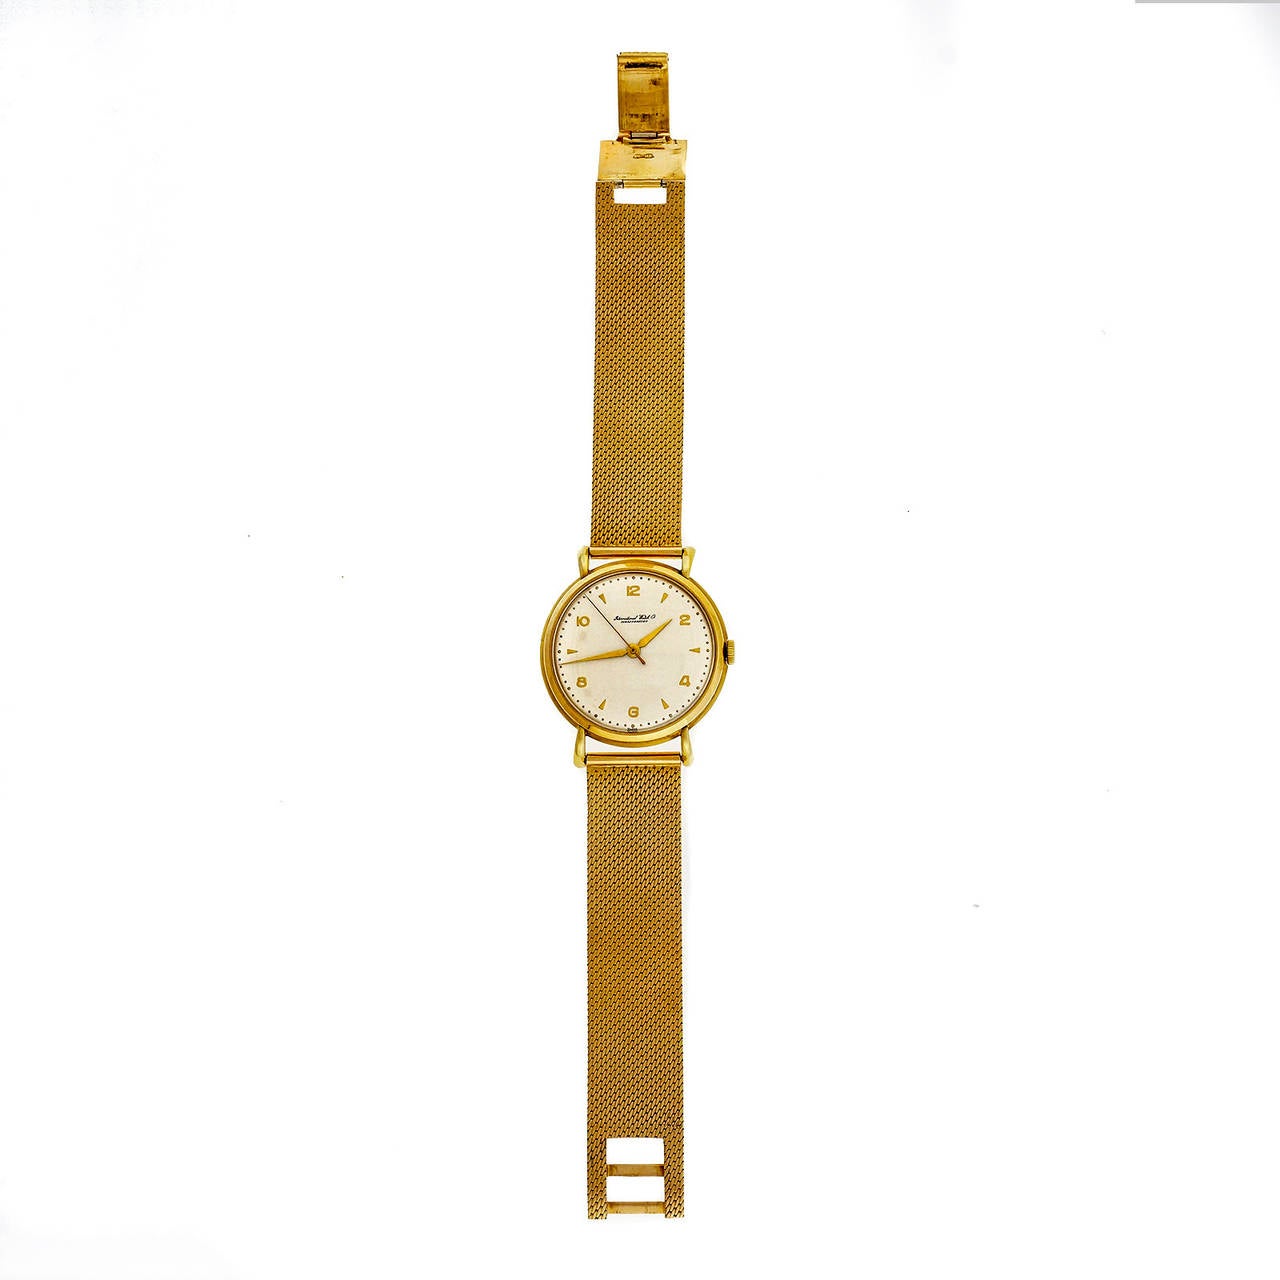 IWC yellow gold wristwatch with manual-wind movement and gold mesh band. Circa 1945.

18k yellow gold 
Length: 4.3mm 
Width: 36mm 
Bracelet length: 8 inches 
Bracelet width at case: 18mm 
Bracelet: 18k solid gold mesh stamped 750 
Case